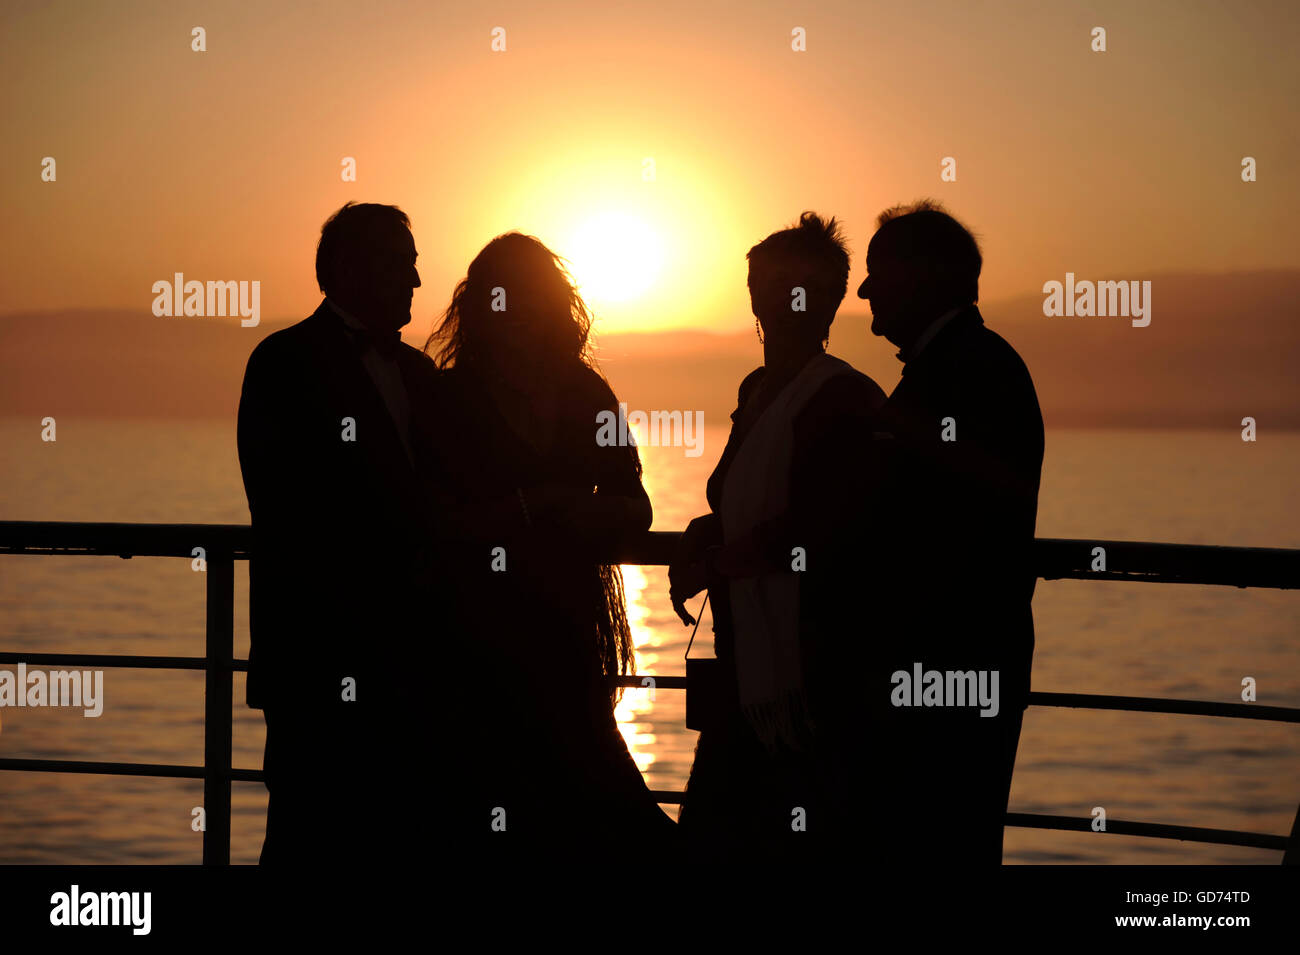 Group of four people on the deck of a cruise ship at sunset Stock Photo